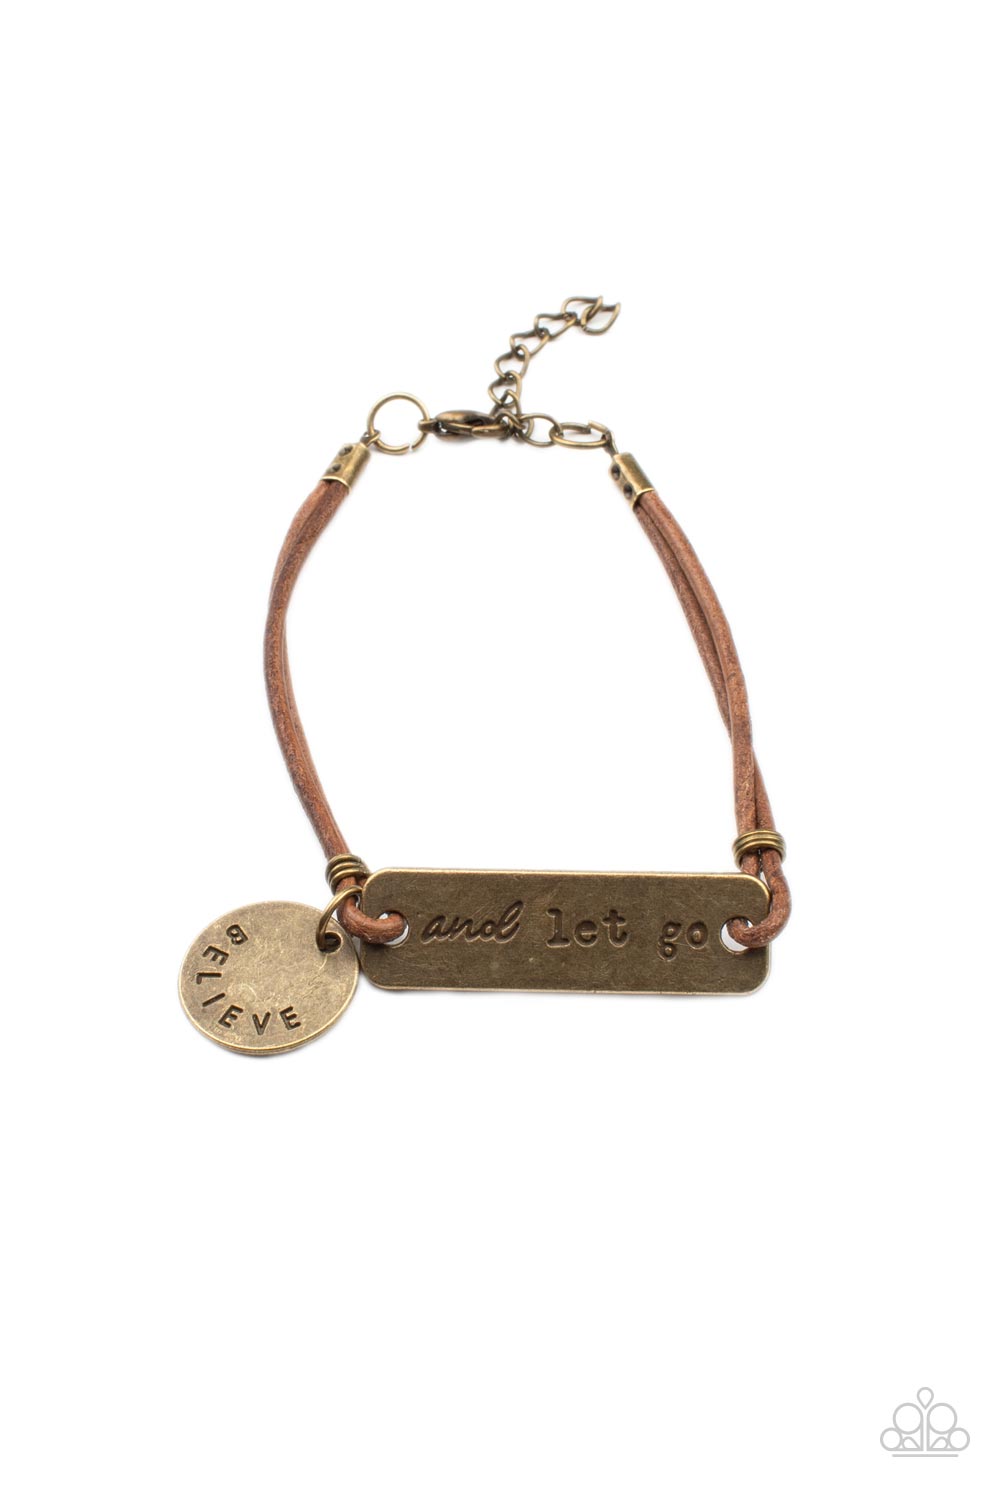 ​Believe and Let Go - Brass Suede Bracelet - Paparazzi Accessories - 
An antiqued disc stamped in the word, "believe" and a brass plate stamped in the phrase, "and let go," are knotted in place around the wrist with layers of brown suede cording, creating a motivational centerpiece. Features an adjustable clasp closure. Sold as one individual bracelet.
